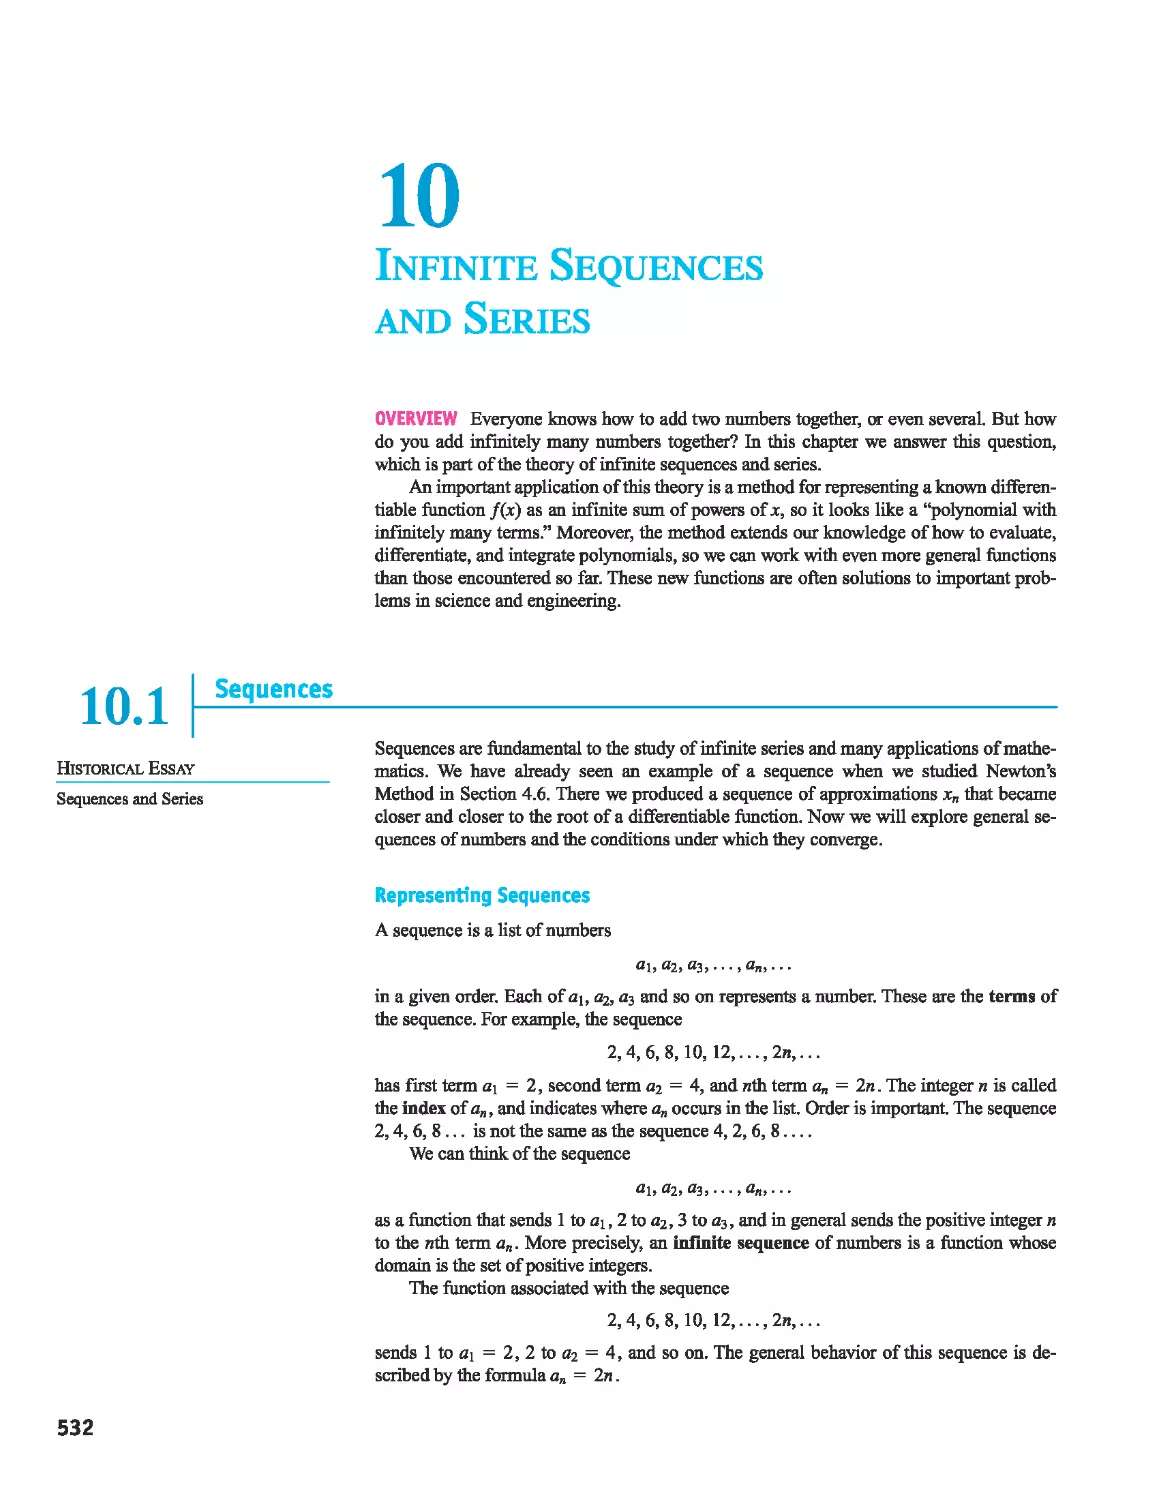 10 - Infinite Sequences and Series